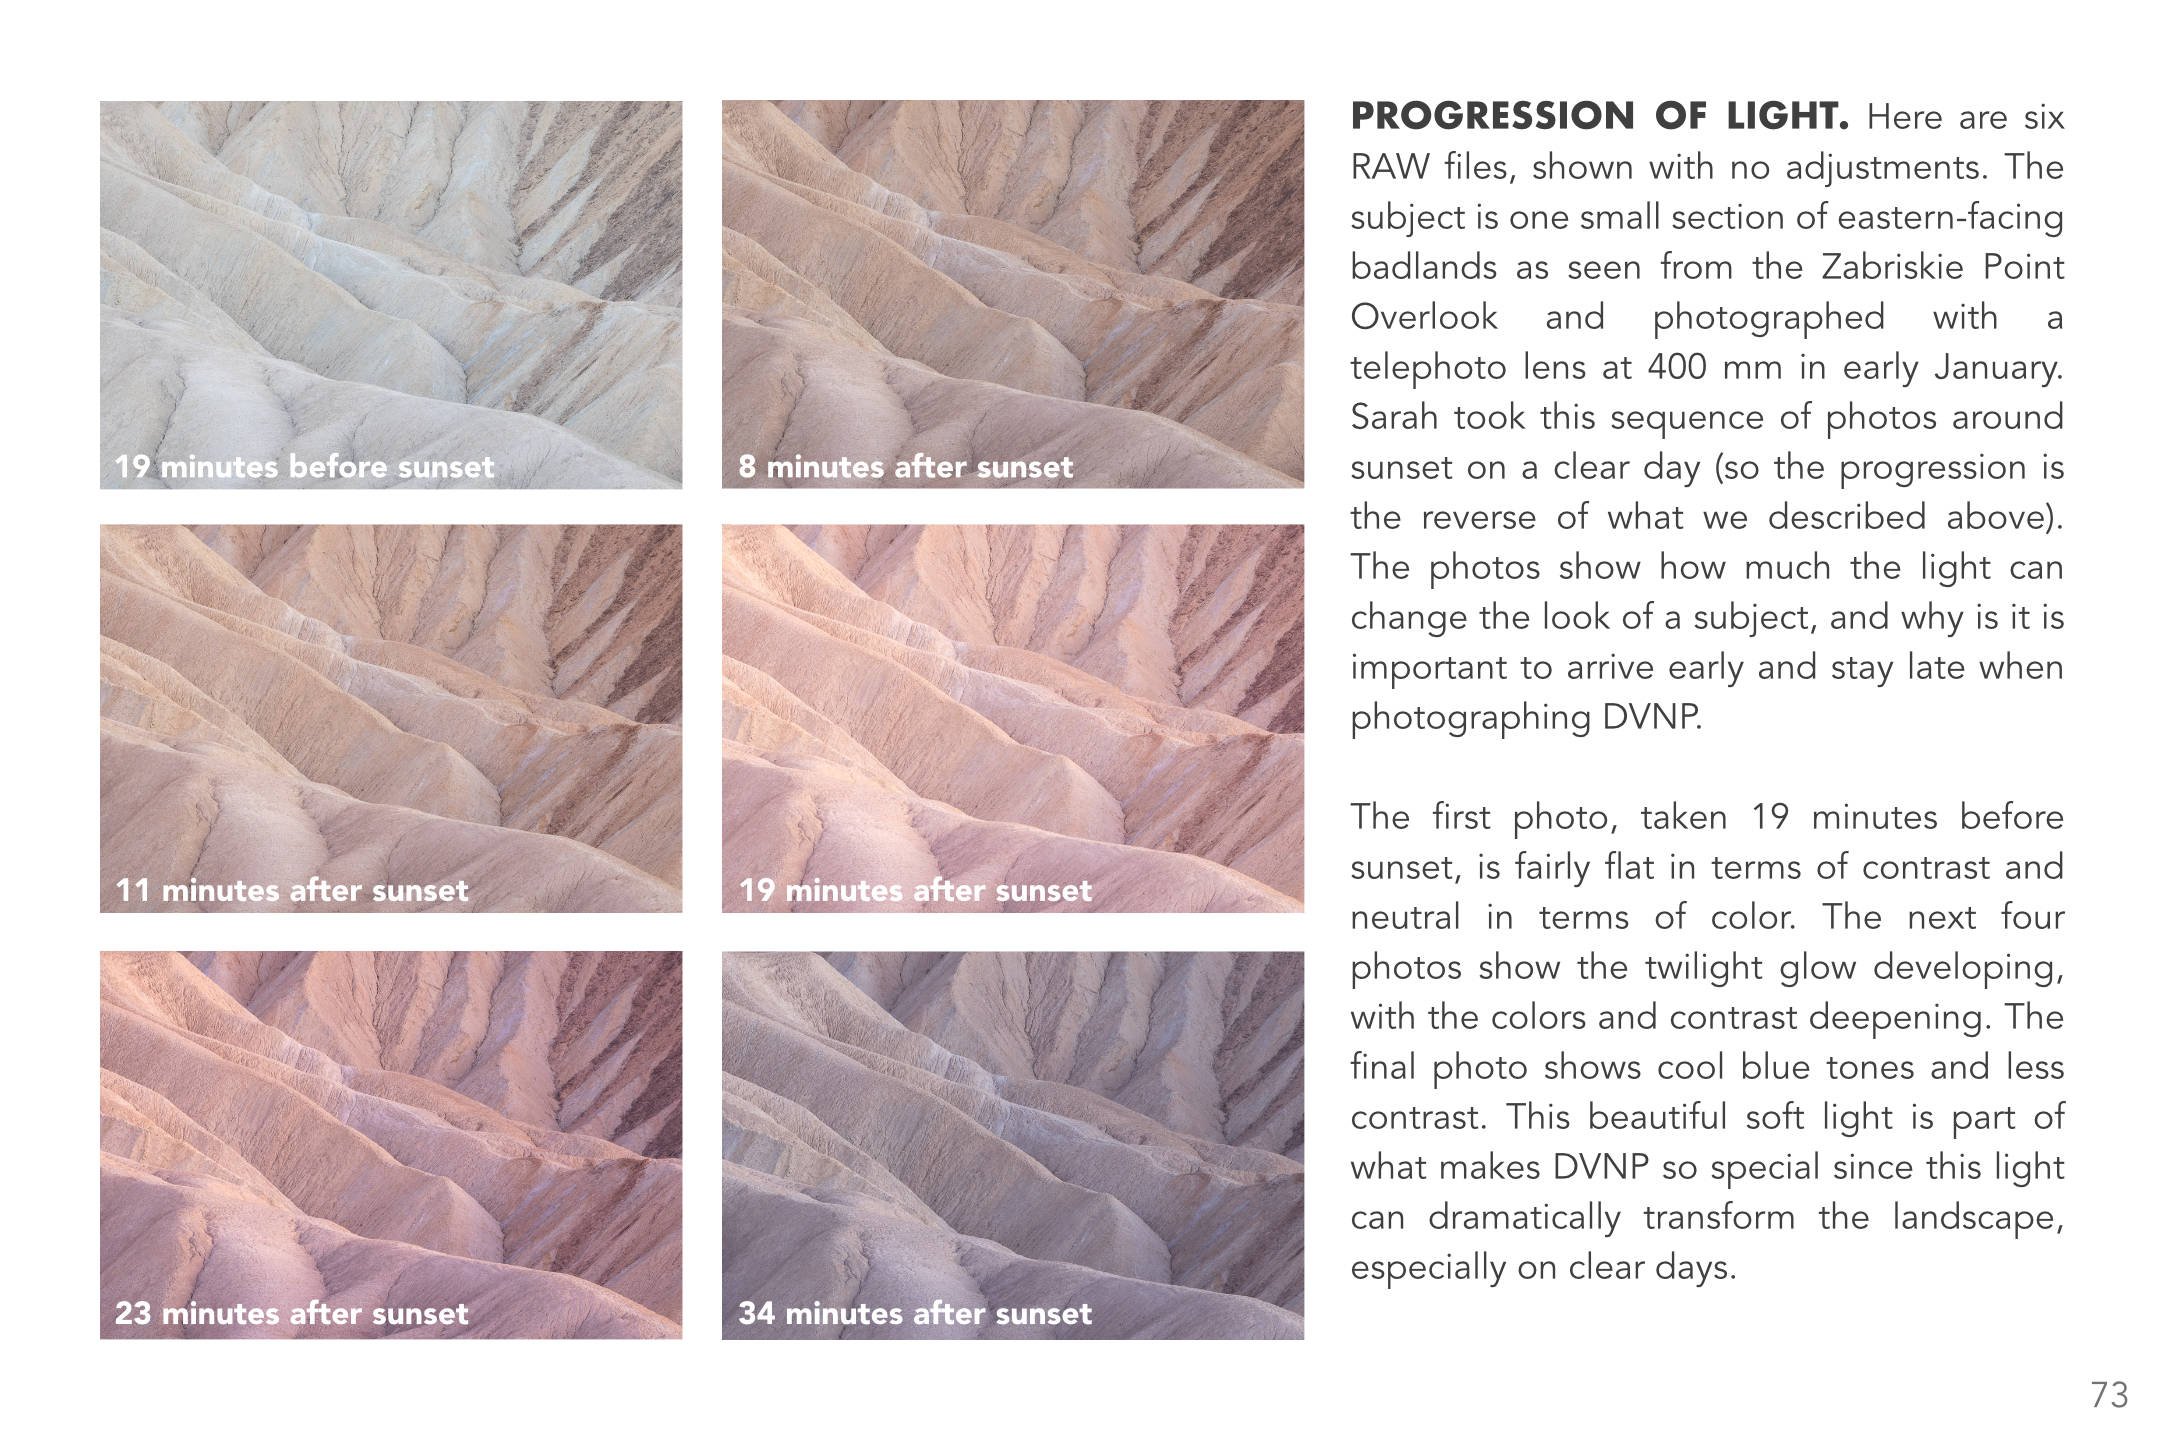 Desert Paradise Second Edition Sample Pages_6.jpg